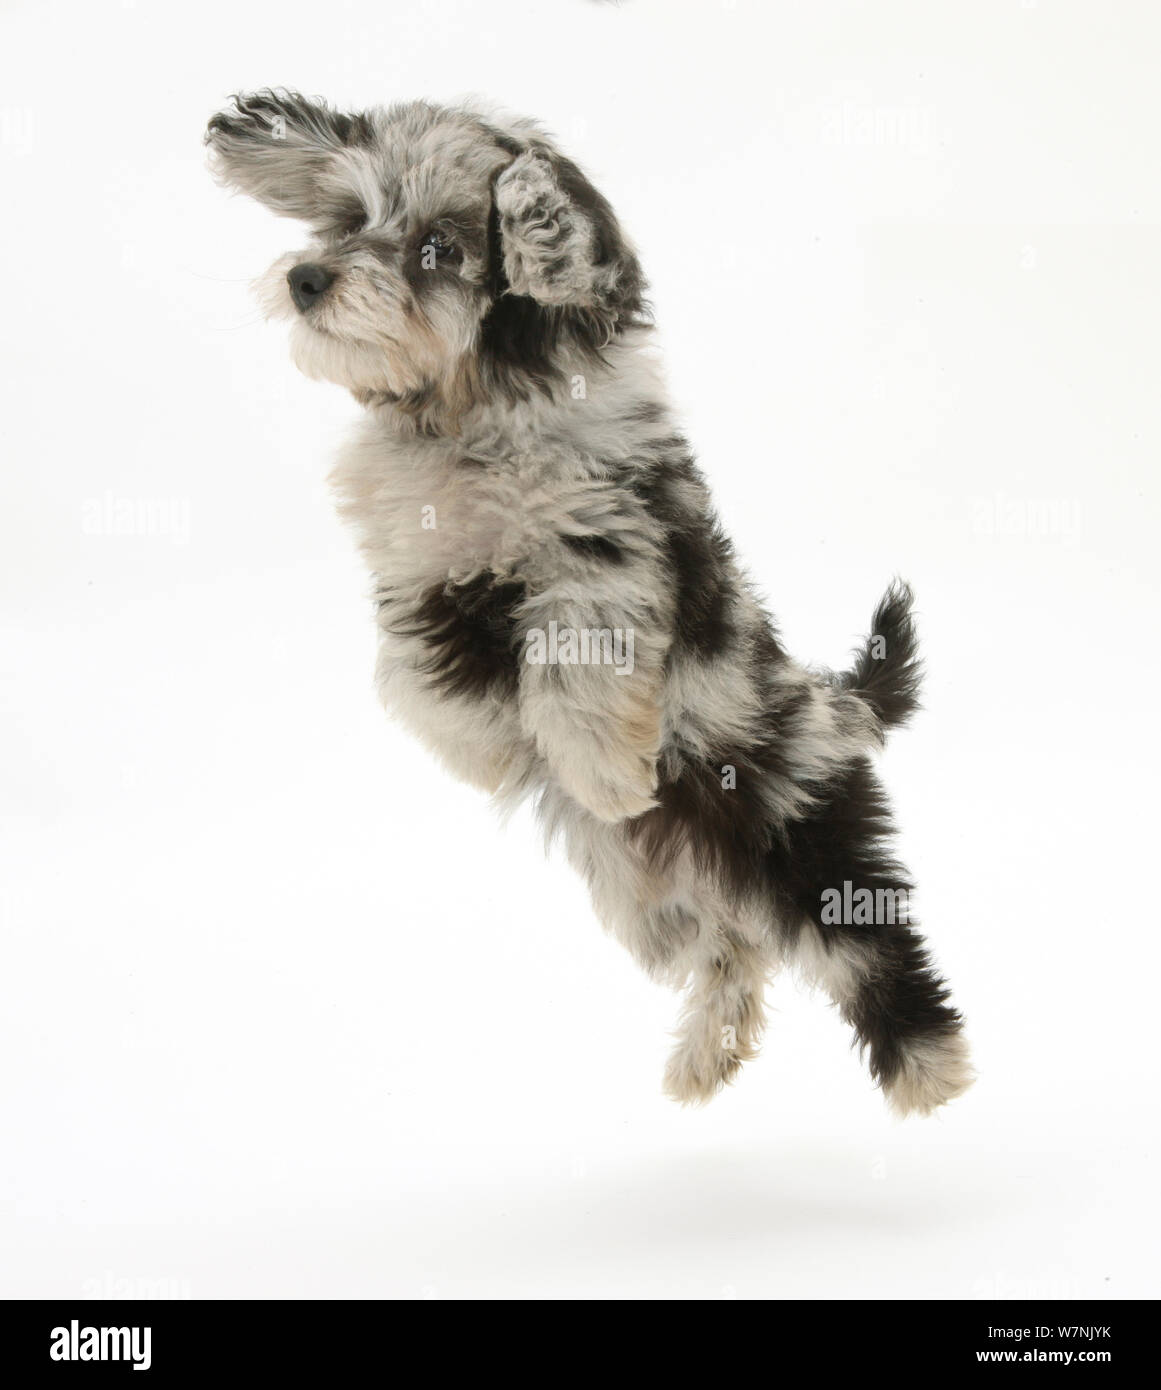 Fluffy black and grey Daxie doodle (Daschund  poodle cross) puppy, Pebbles, taking a flying leap. Stock Photo